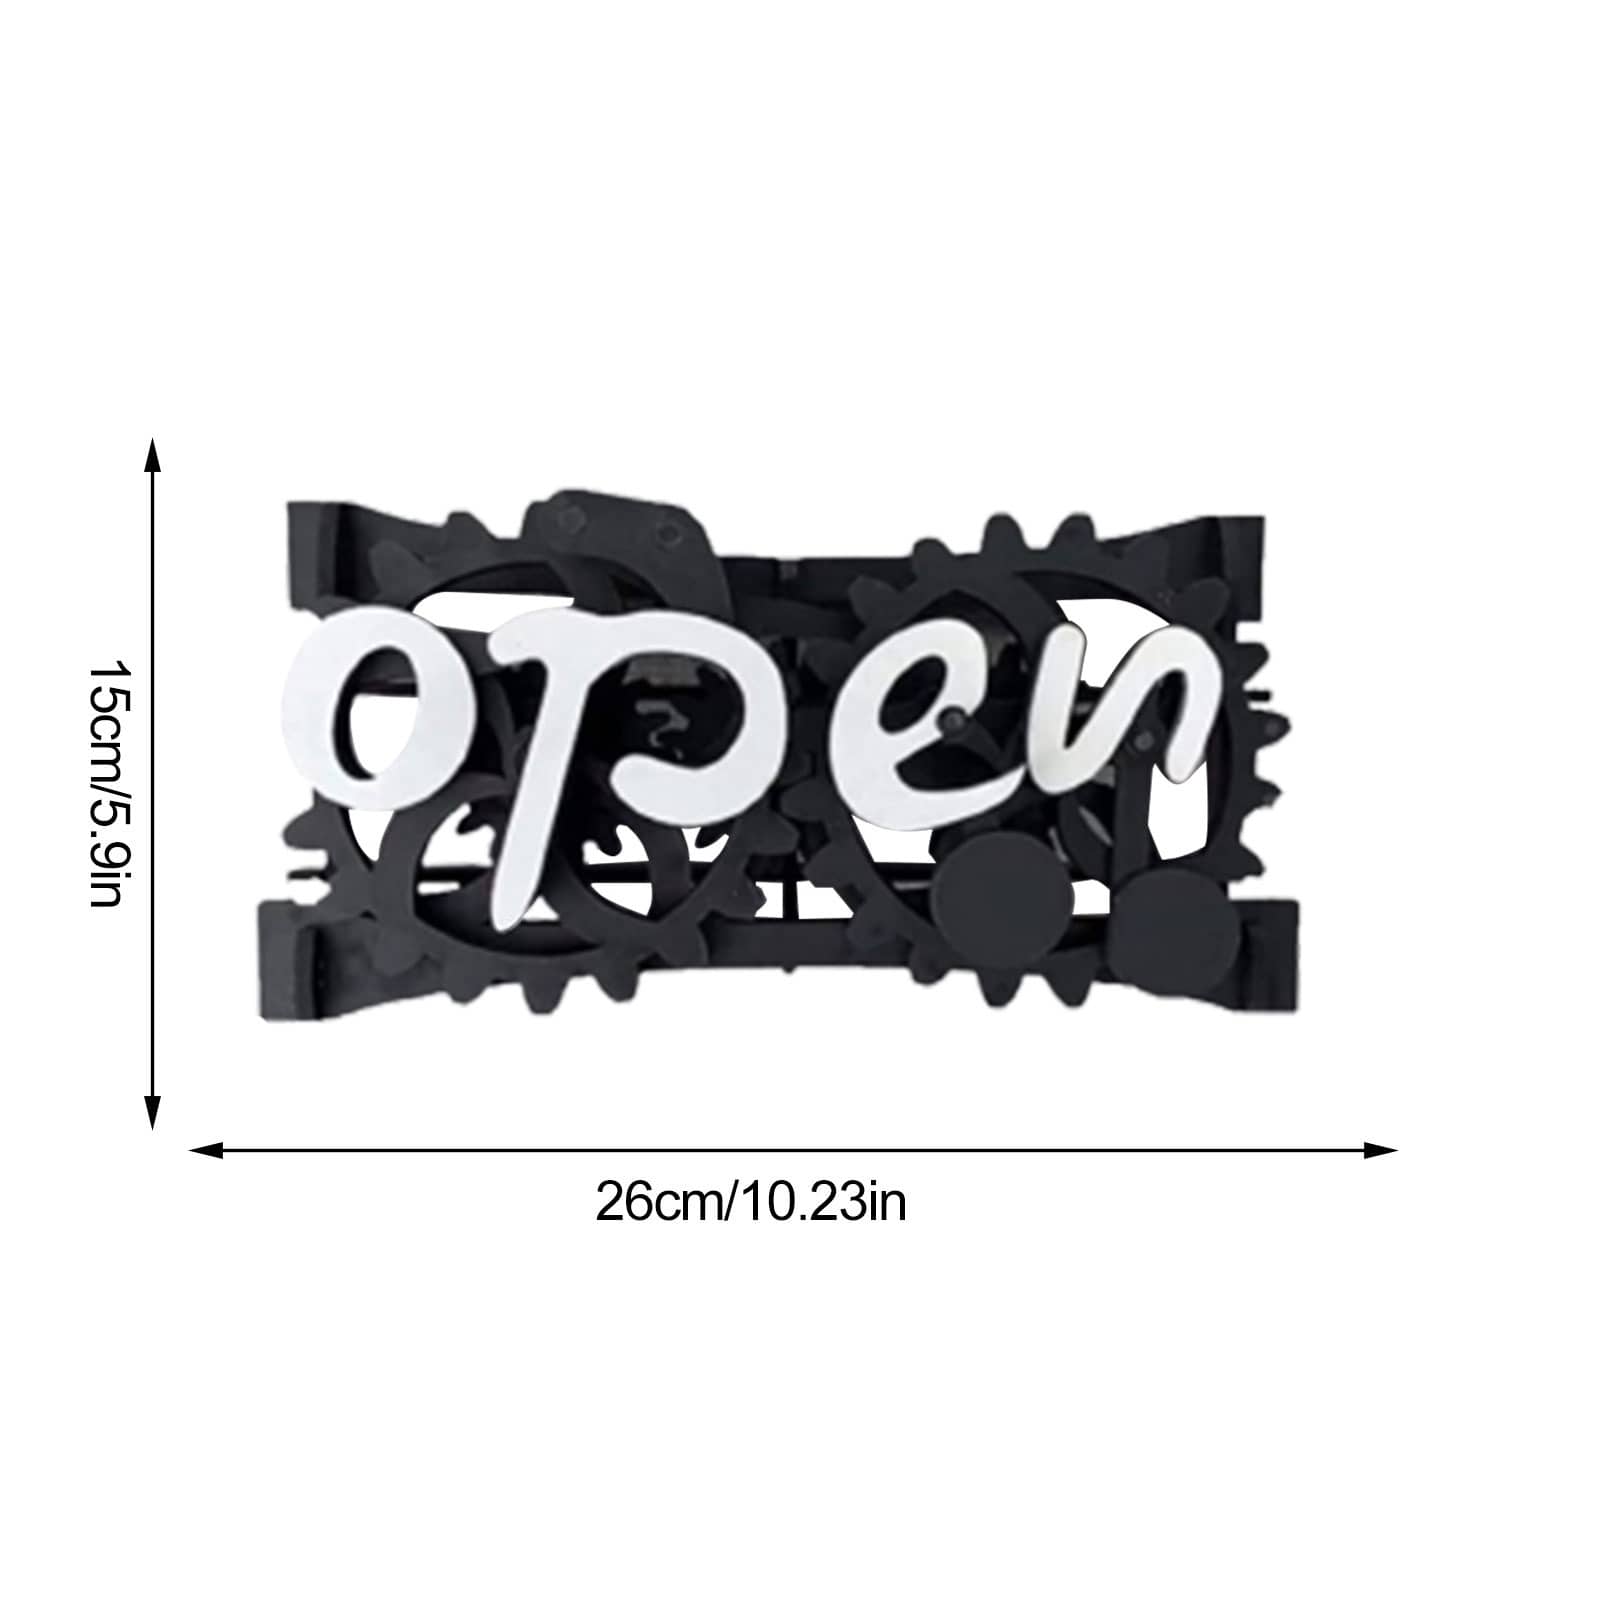 Wooden Double-sided Open/Closed Sign Signs Reversible Gear Business Closing Sign Shop Plaques Billboard Home Decor Ornaments